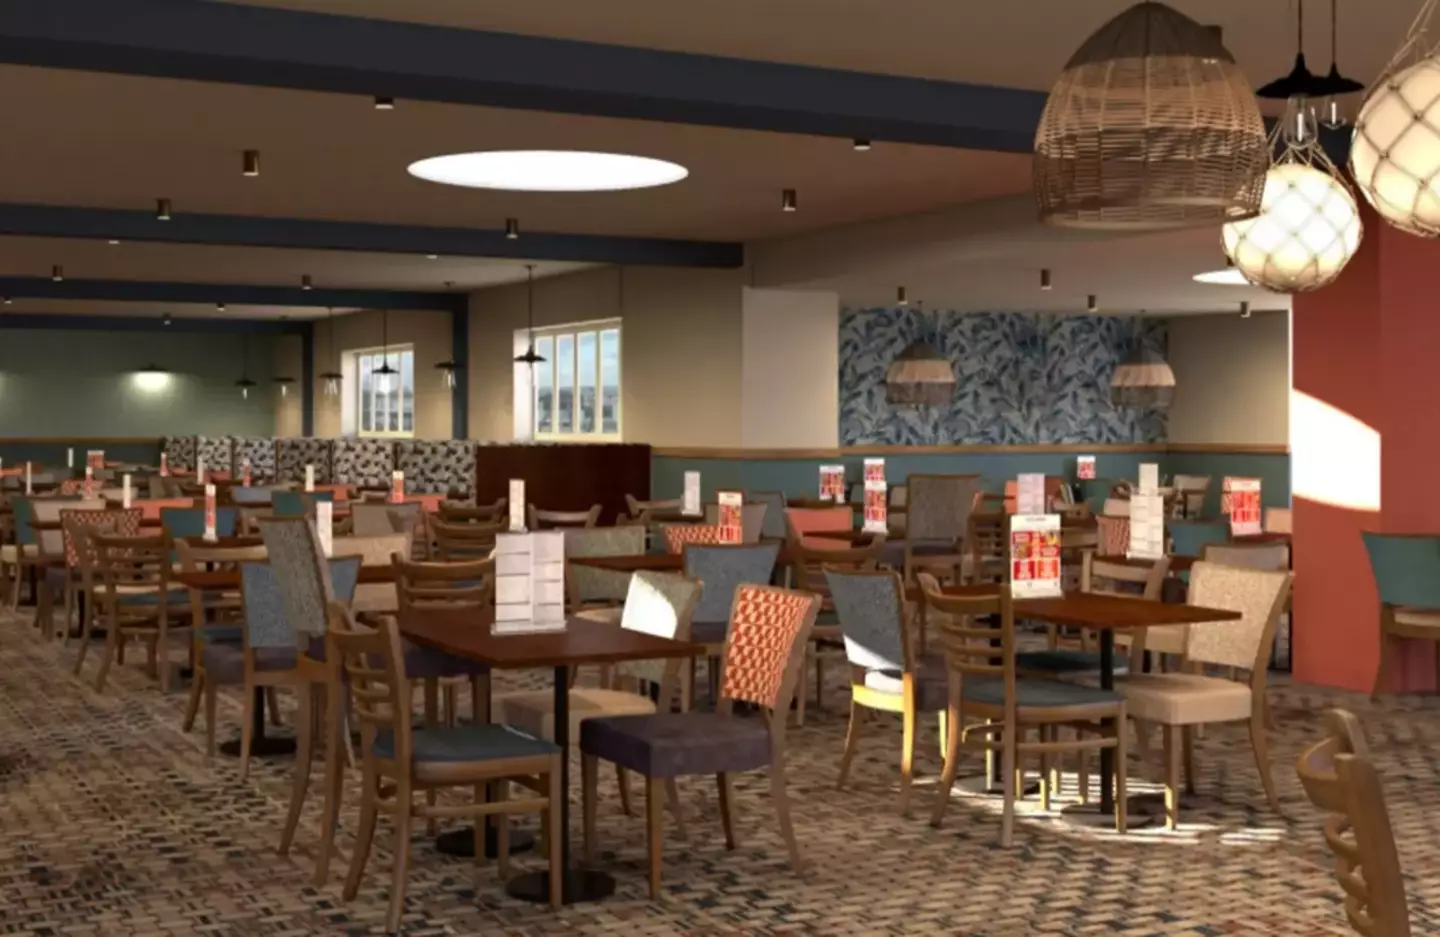 You'll be able to enjoy a Guinness at the recently opened Haven Weatherspoons.